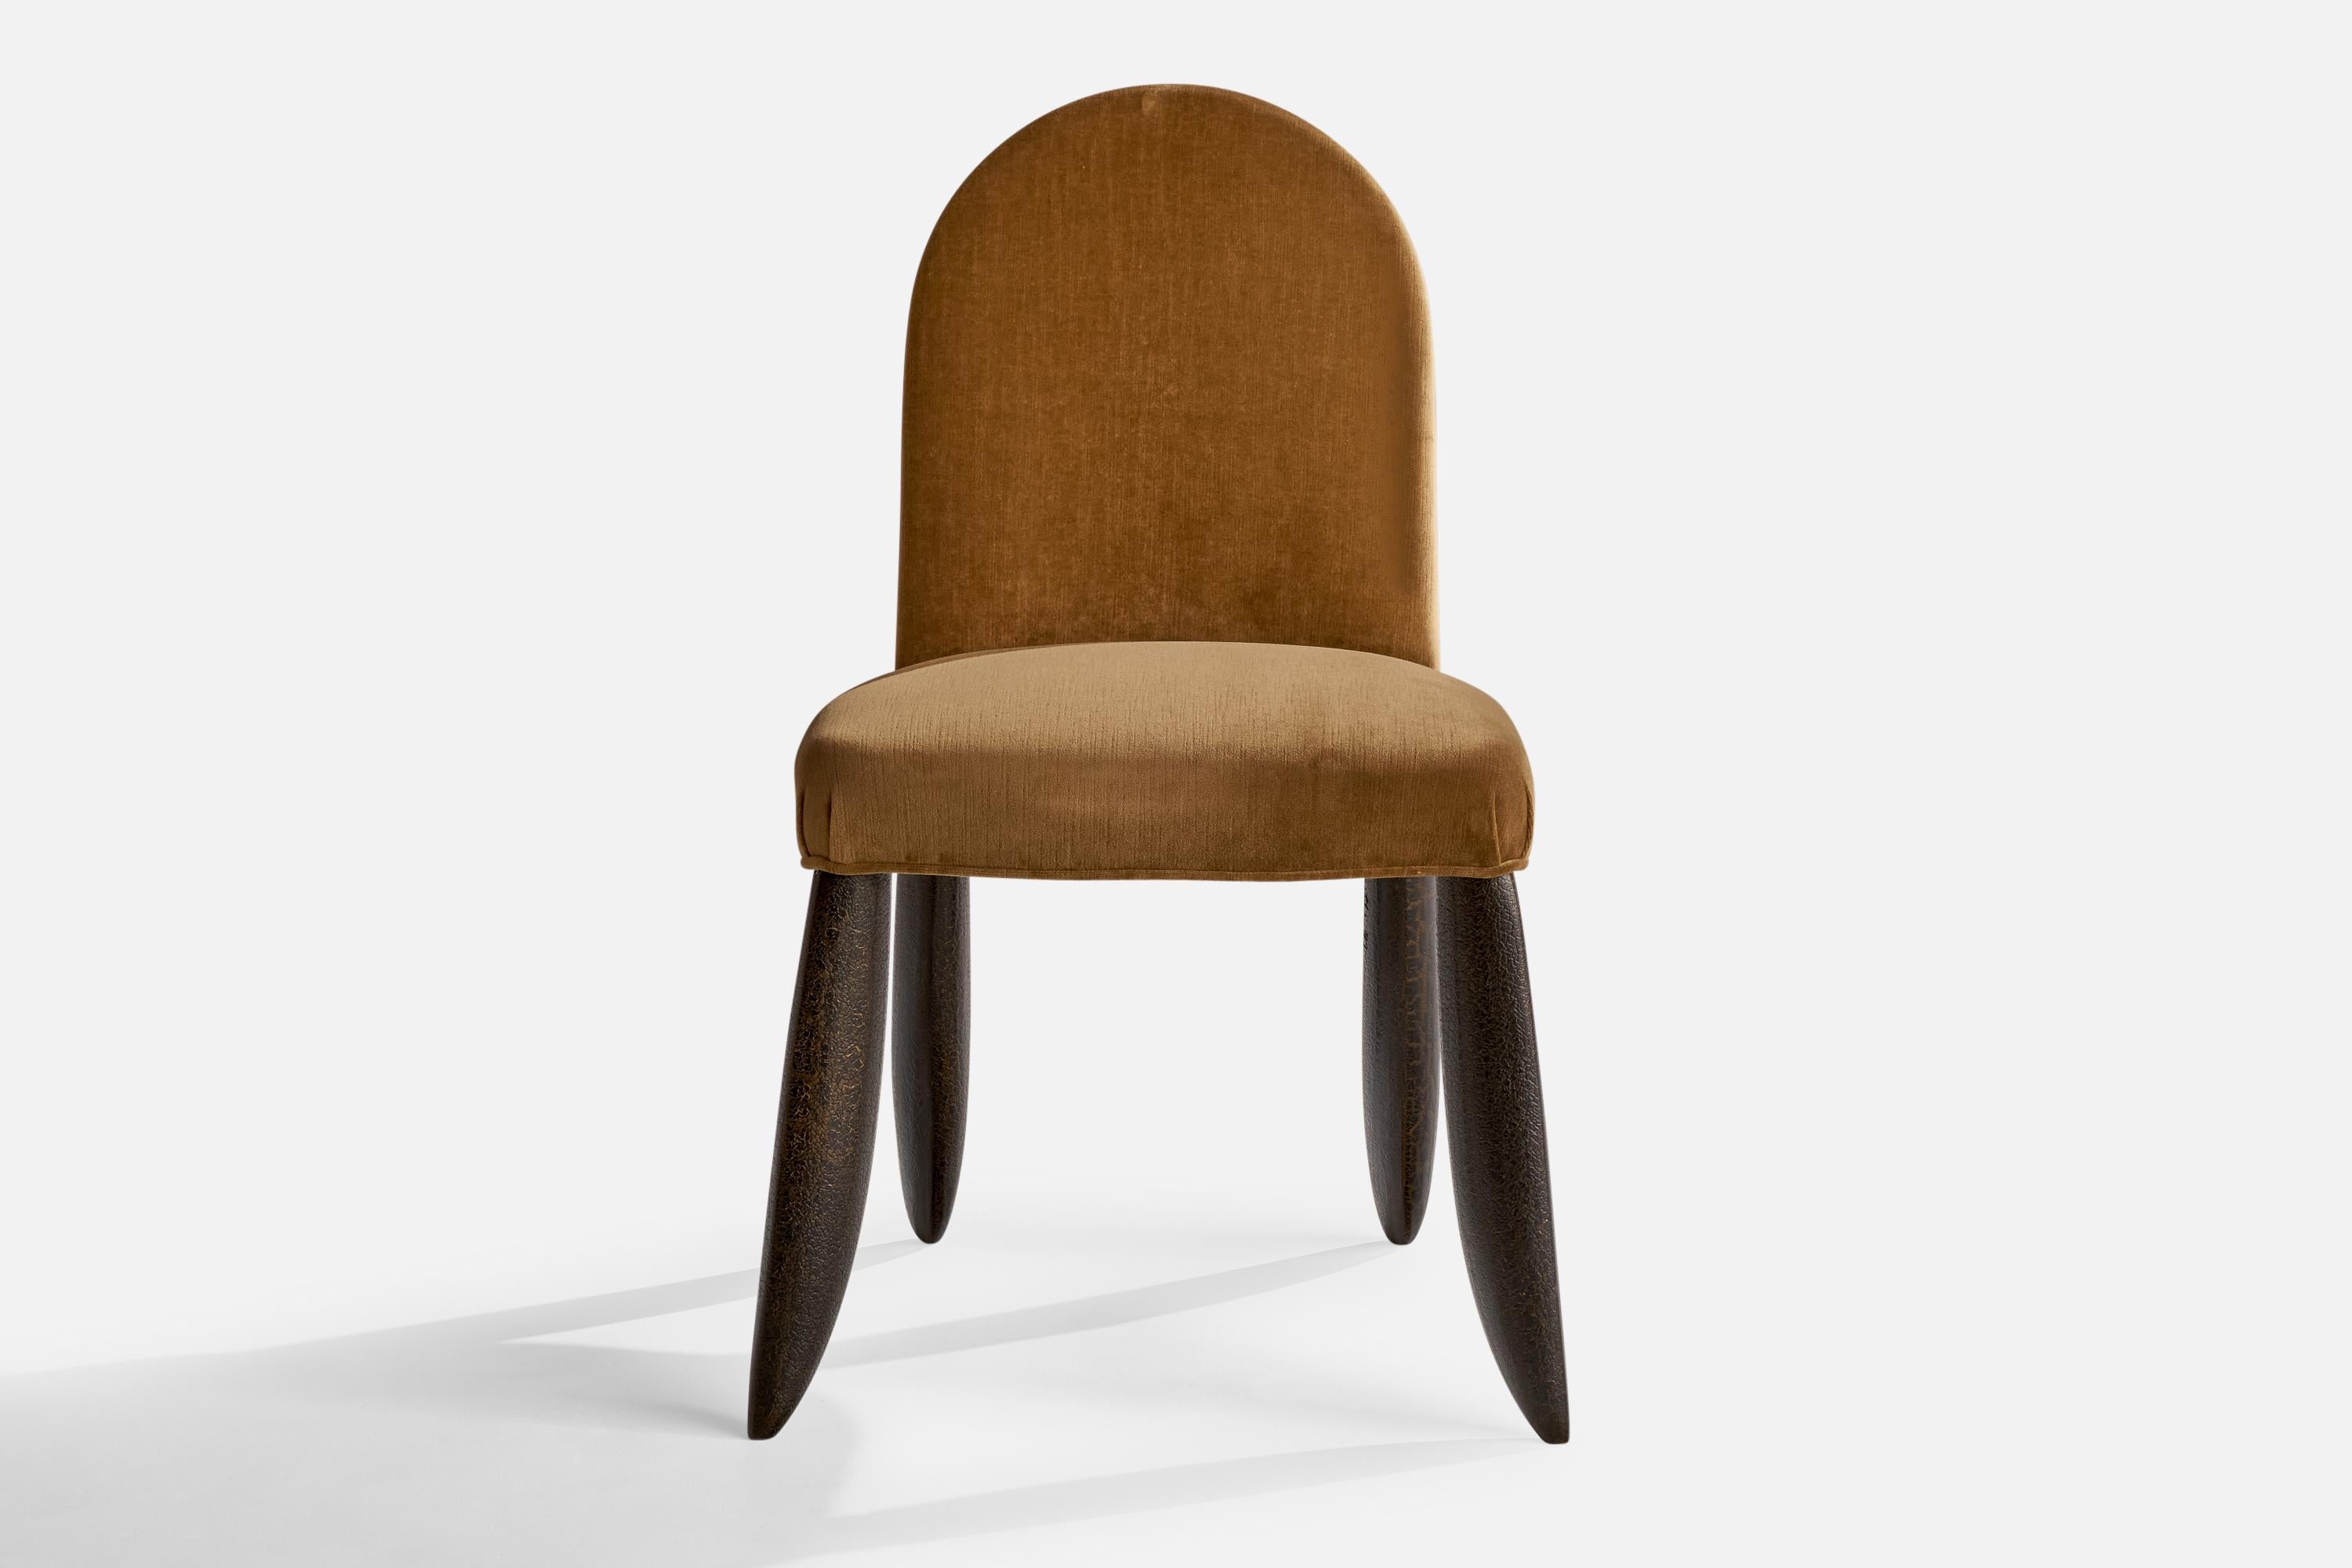 Wendell Castle, Side Chair, Mahogany, Velvet, USA, 1997 In Good Condition For Sale In High Point, NC